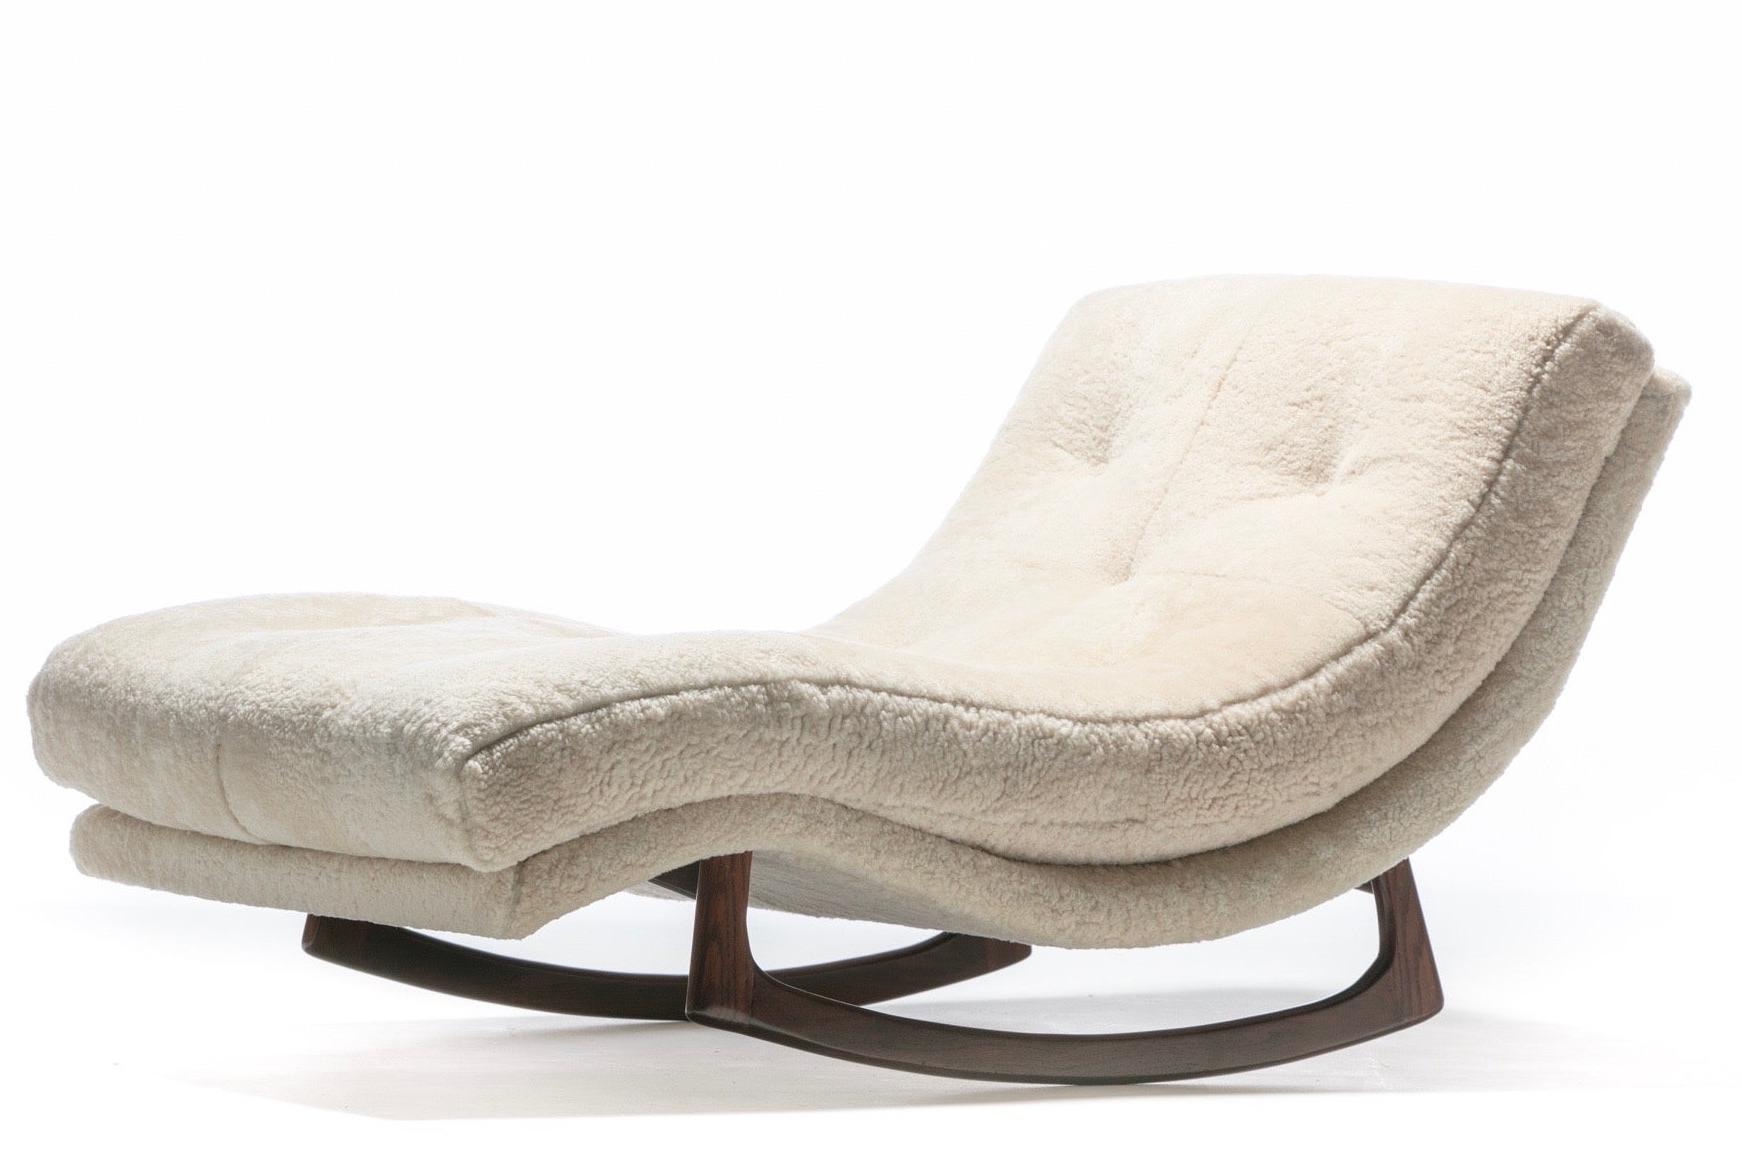 Mid-Century Modern Adrian Pearsall Waive Chaise Rocker Lounge in Ivory Shearling with Walnut Legs